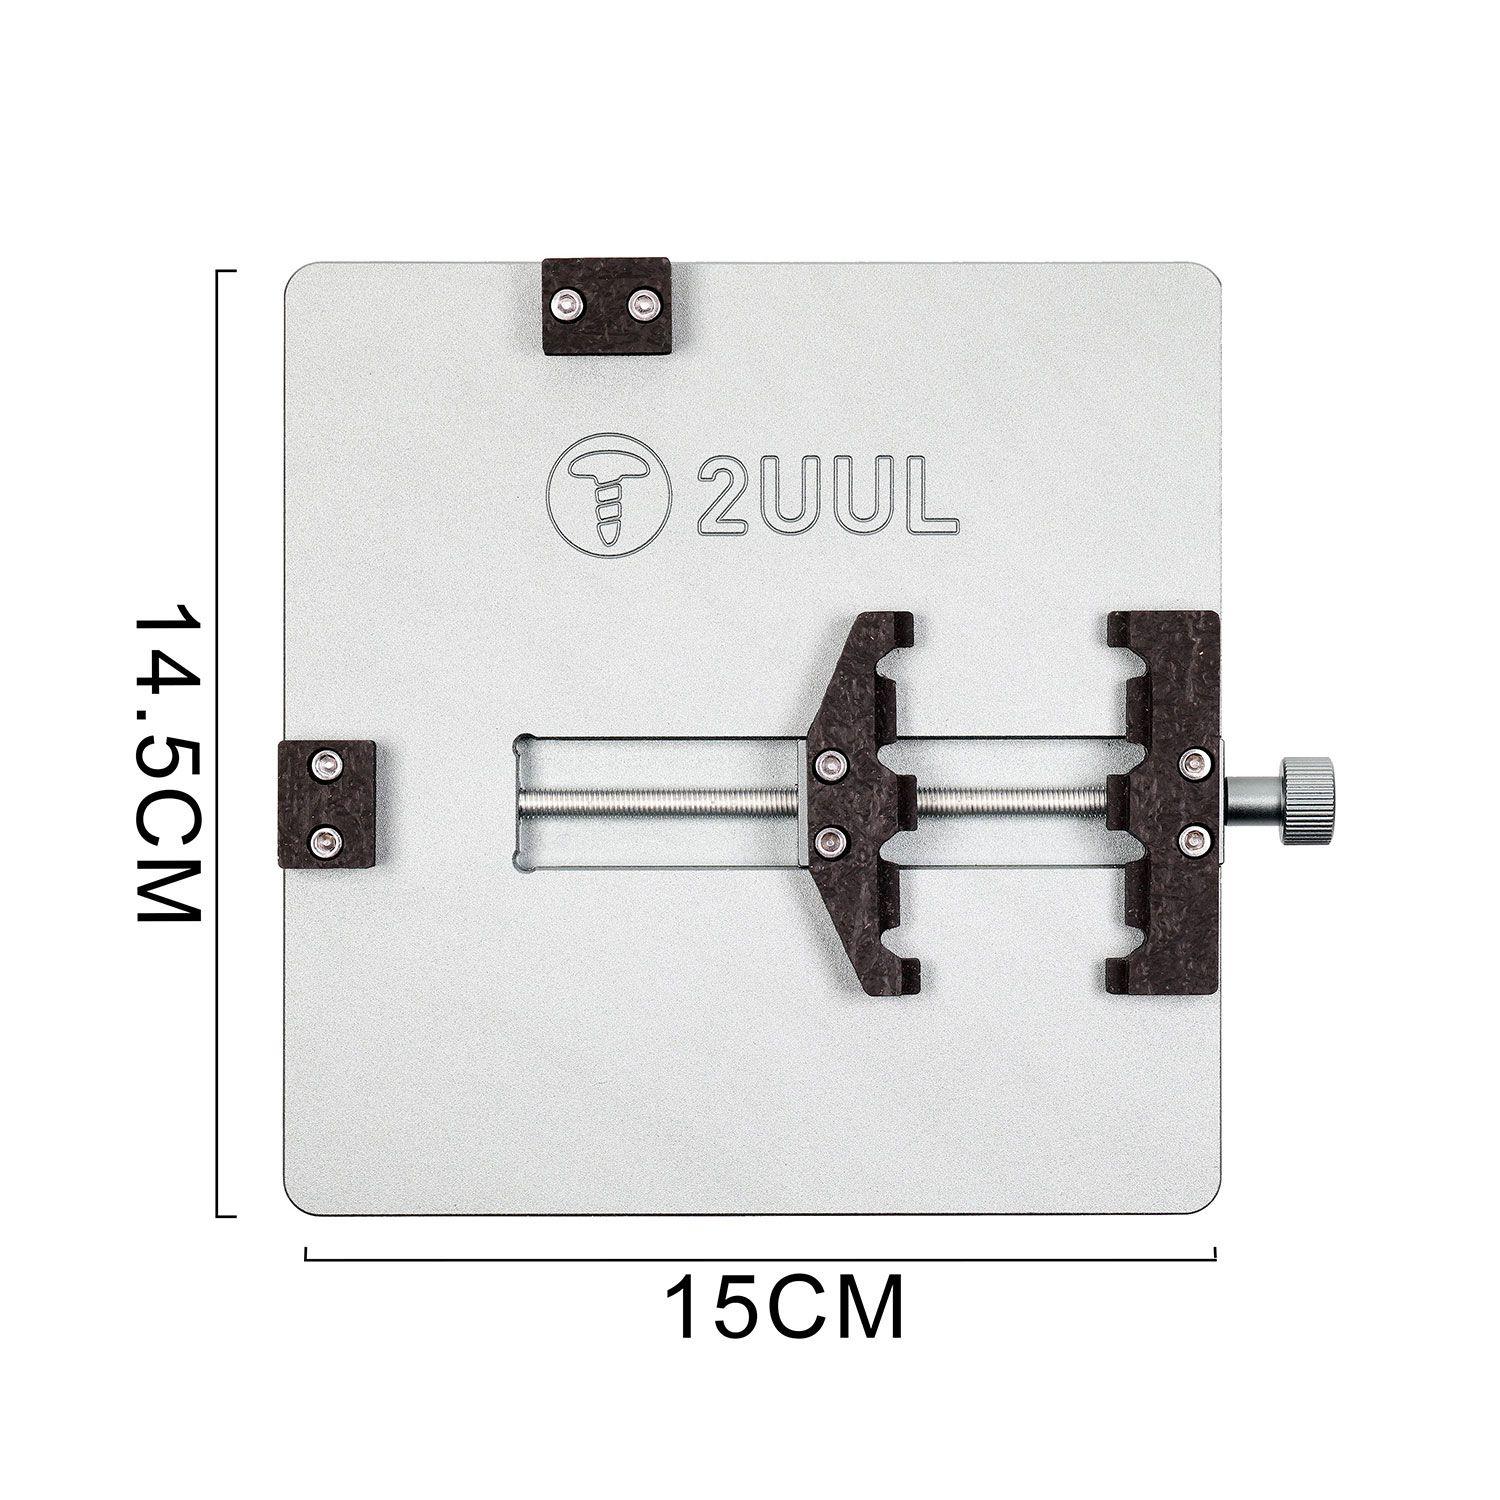 Universal service Holder for back cover / watch repair 2uuL DA02